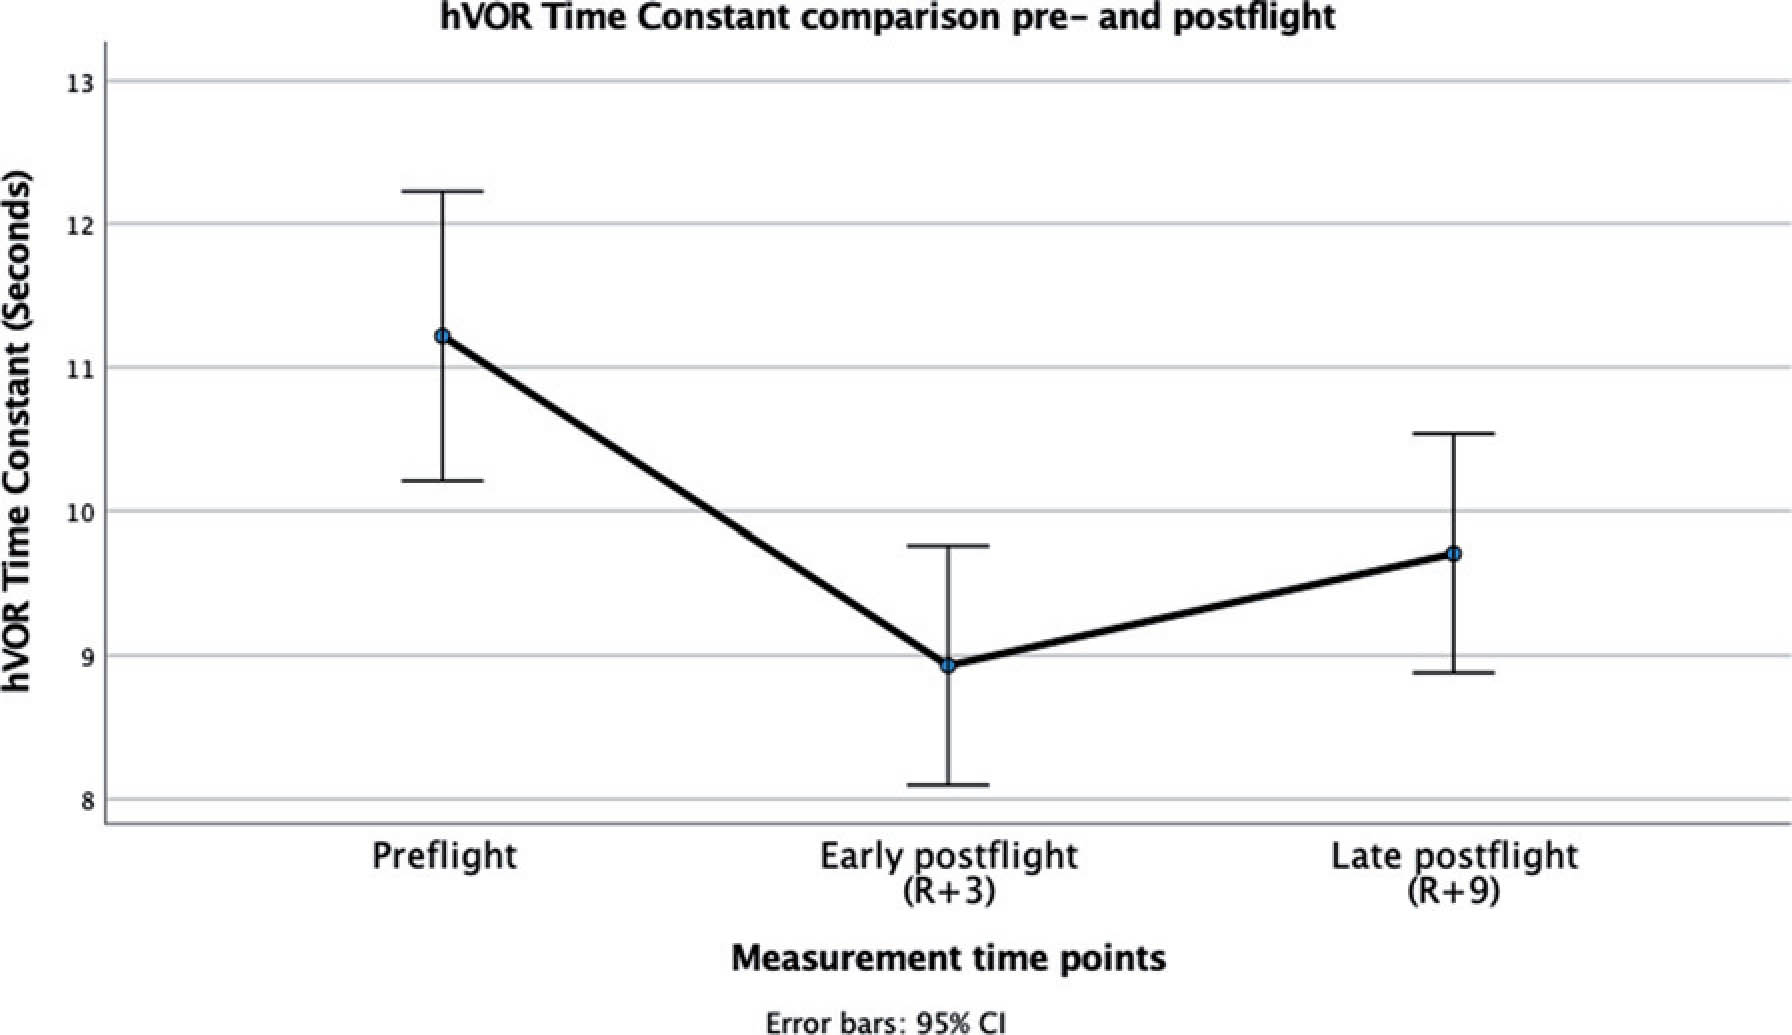 Comparison of the Time Constant values for hVOR preflight and respectively early and late postflight during CCW centrifugation acceleration. Preflight are measurements acquired before launching, Early postflight and Late postflight measurements are respectively acquired 3 and 9 days after landing. The y-axis depicts the average hVOR Time Constant for these timepoints. Preflight vs Early postflight and Preflight vs Late postflight comparison were significantly different (p<0.001).